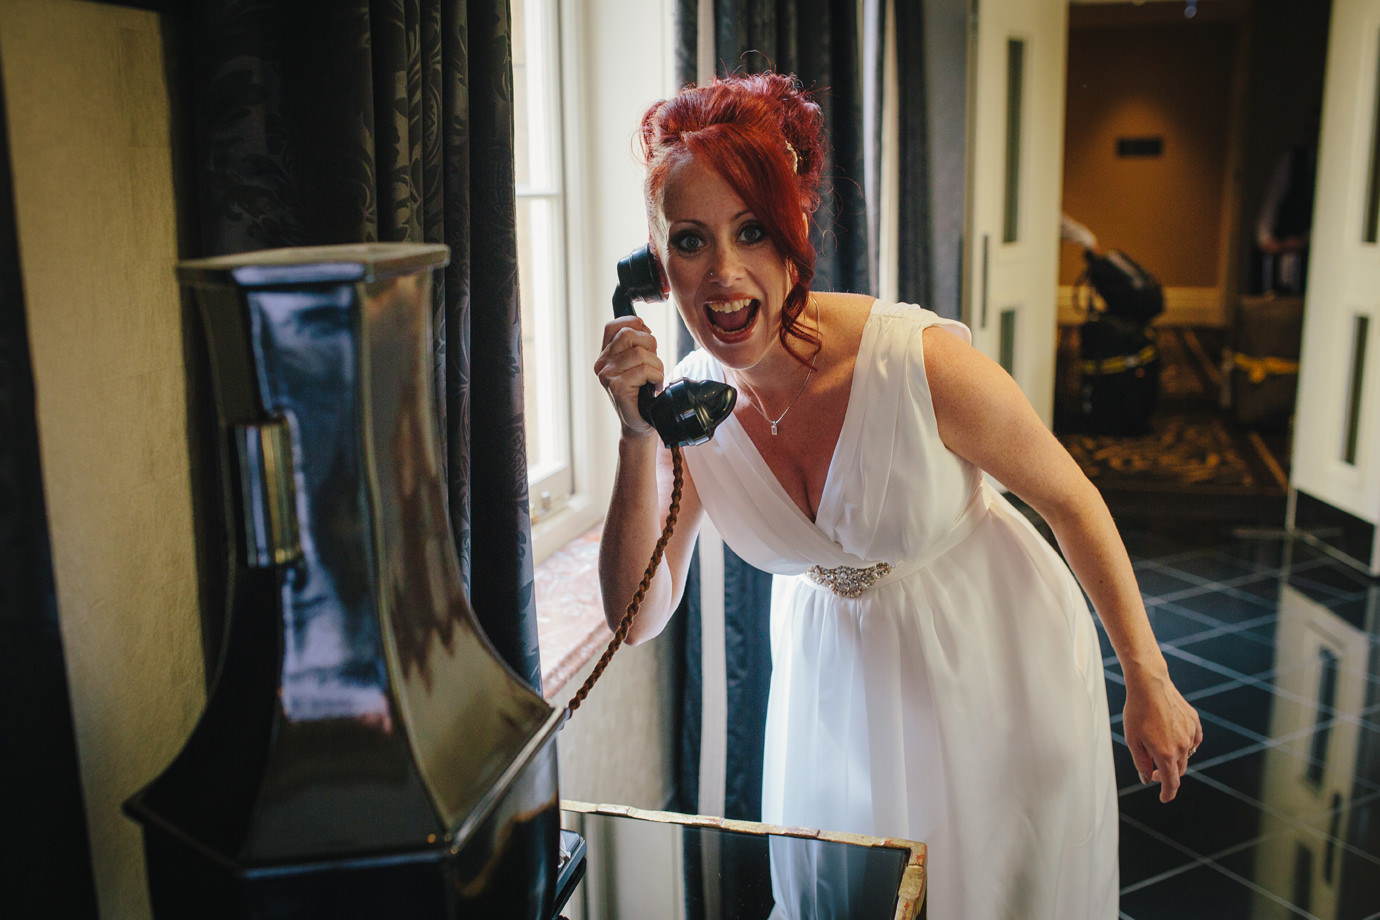 Discovering the phone during a wander around the Savoy hotel